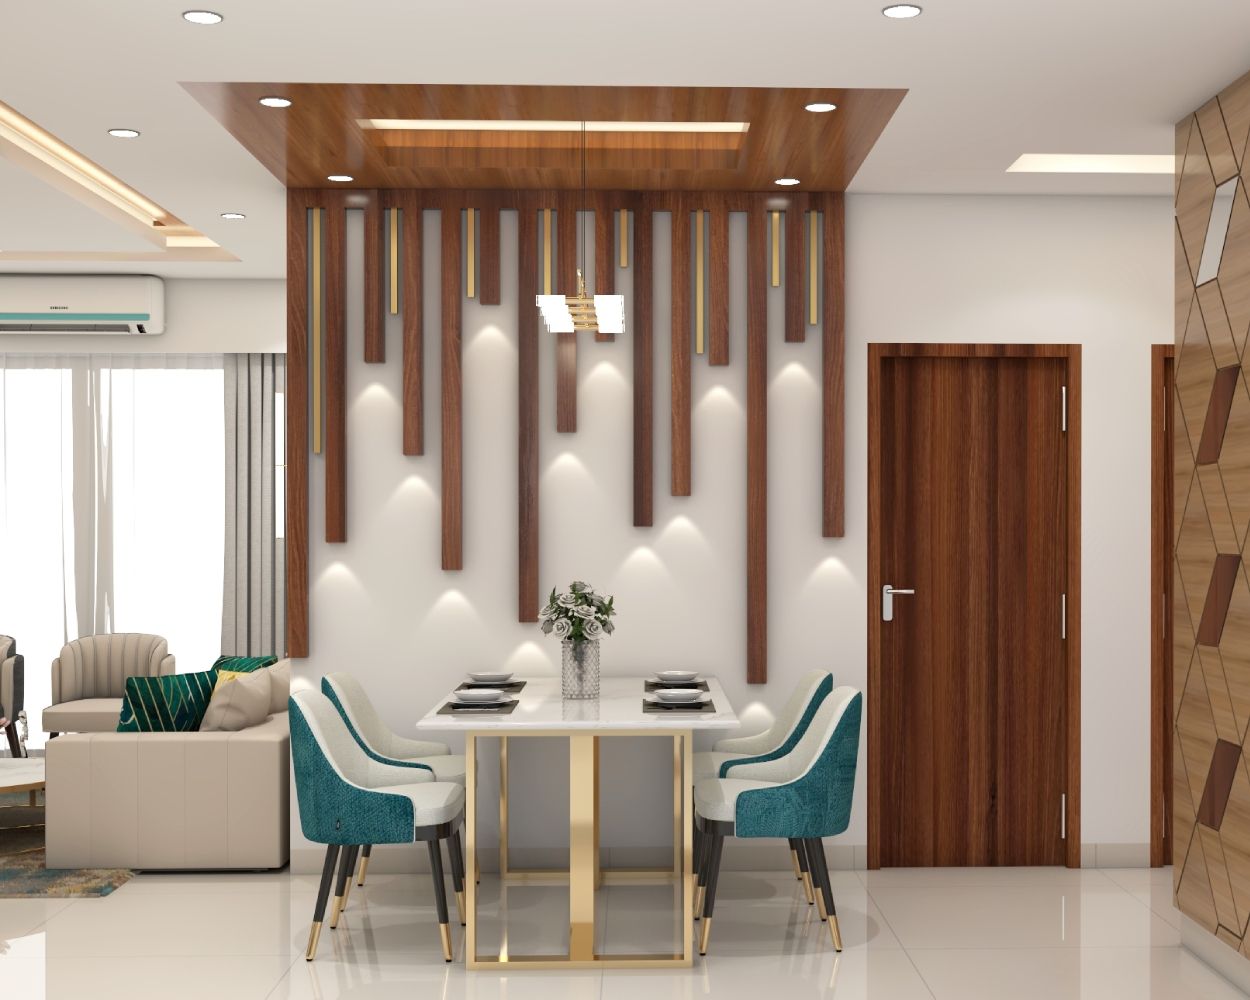 Contemporary Square Single-Layered Ceiling Design With Wooden Battens And Drop Down Light